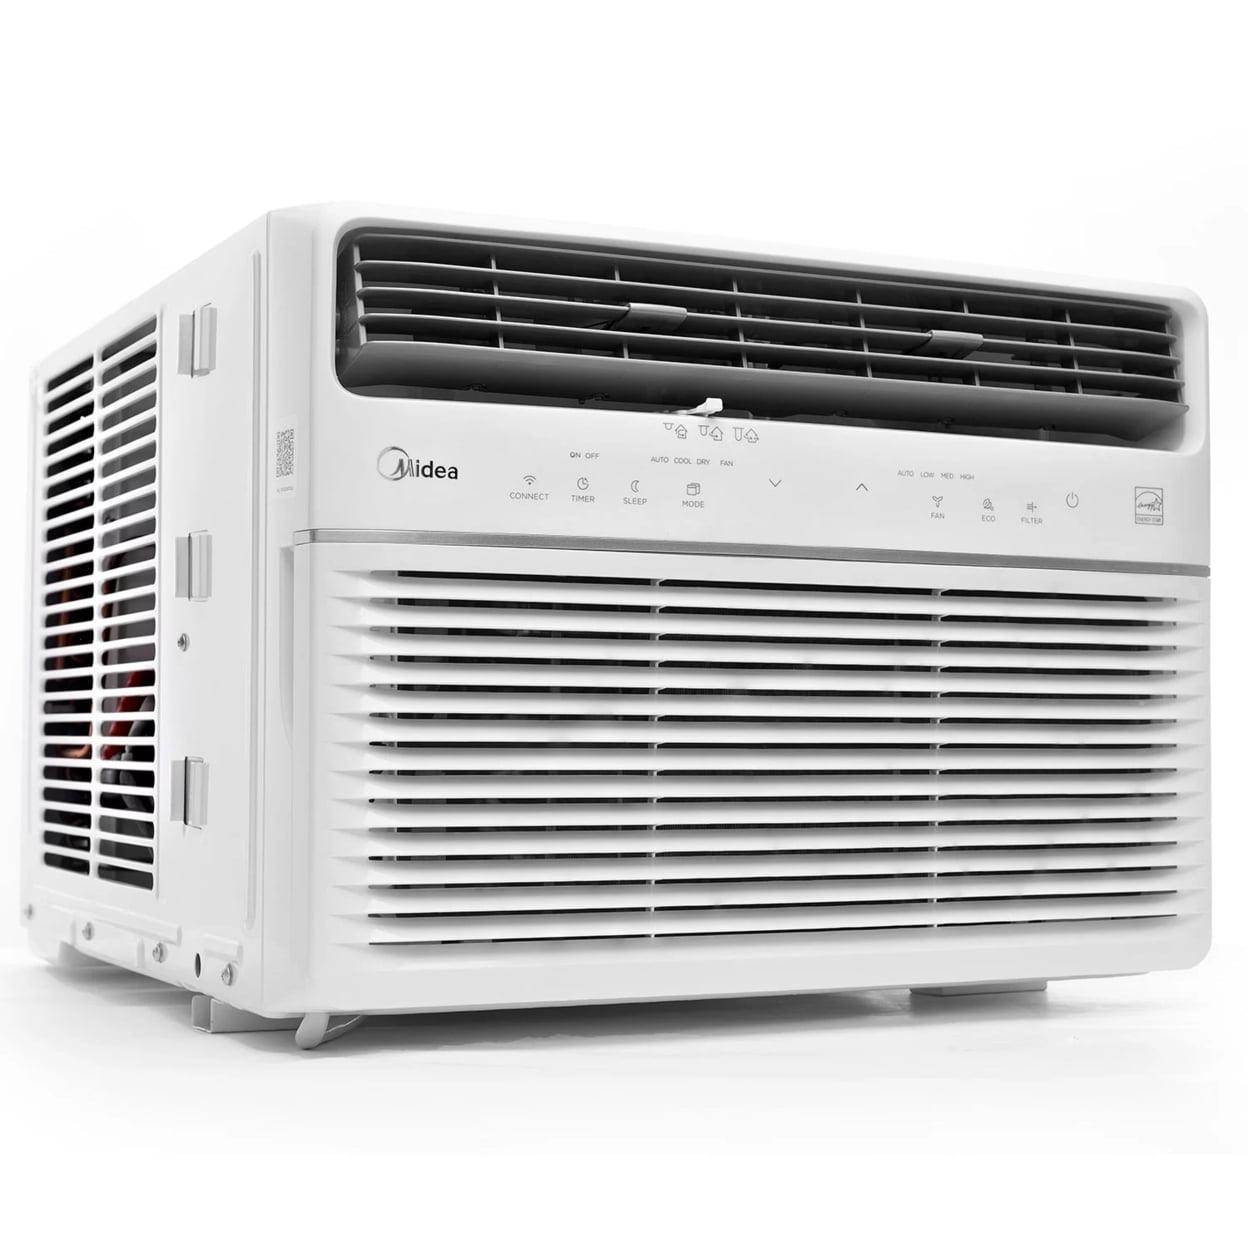 MIDEA 12,000 BTU SmartCool Window Air Conditioner with WiFi and Voice Control - Grovano